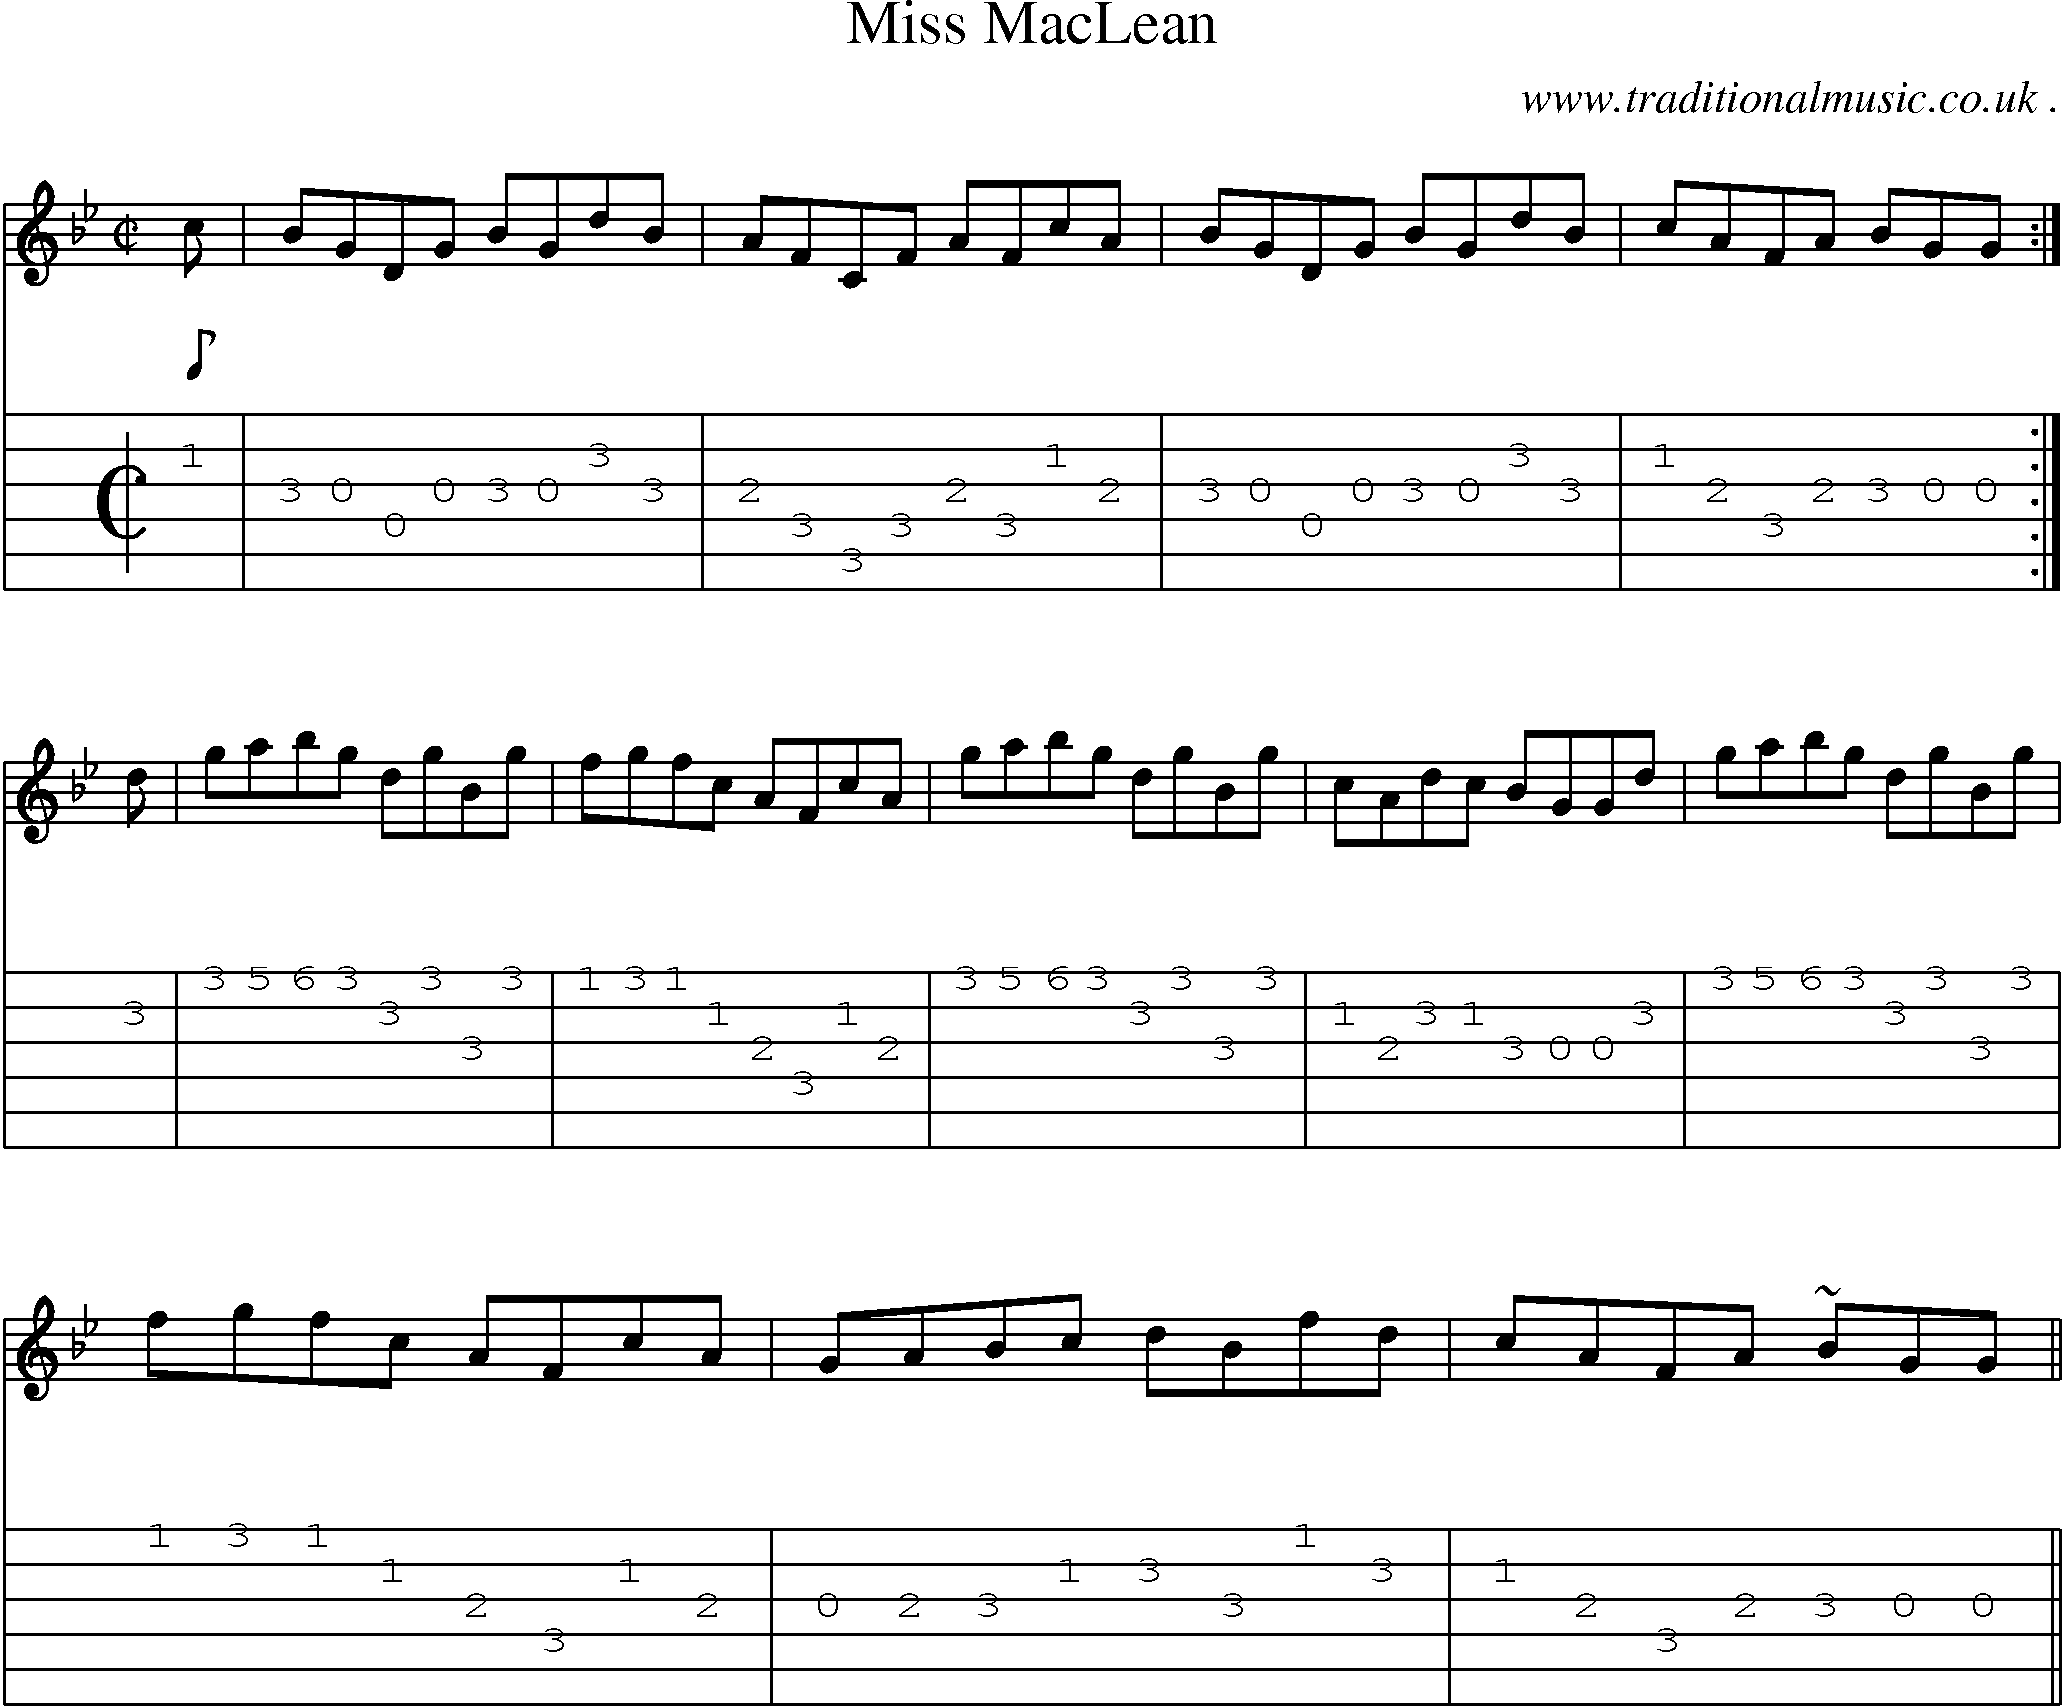 Sheet-music  score, Chords and Guitar Tabs for Miss Maclean